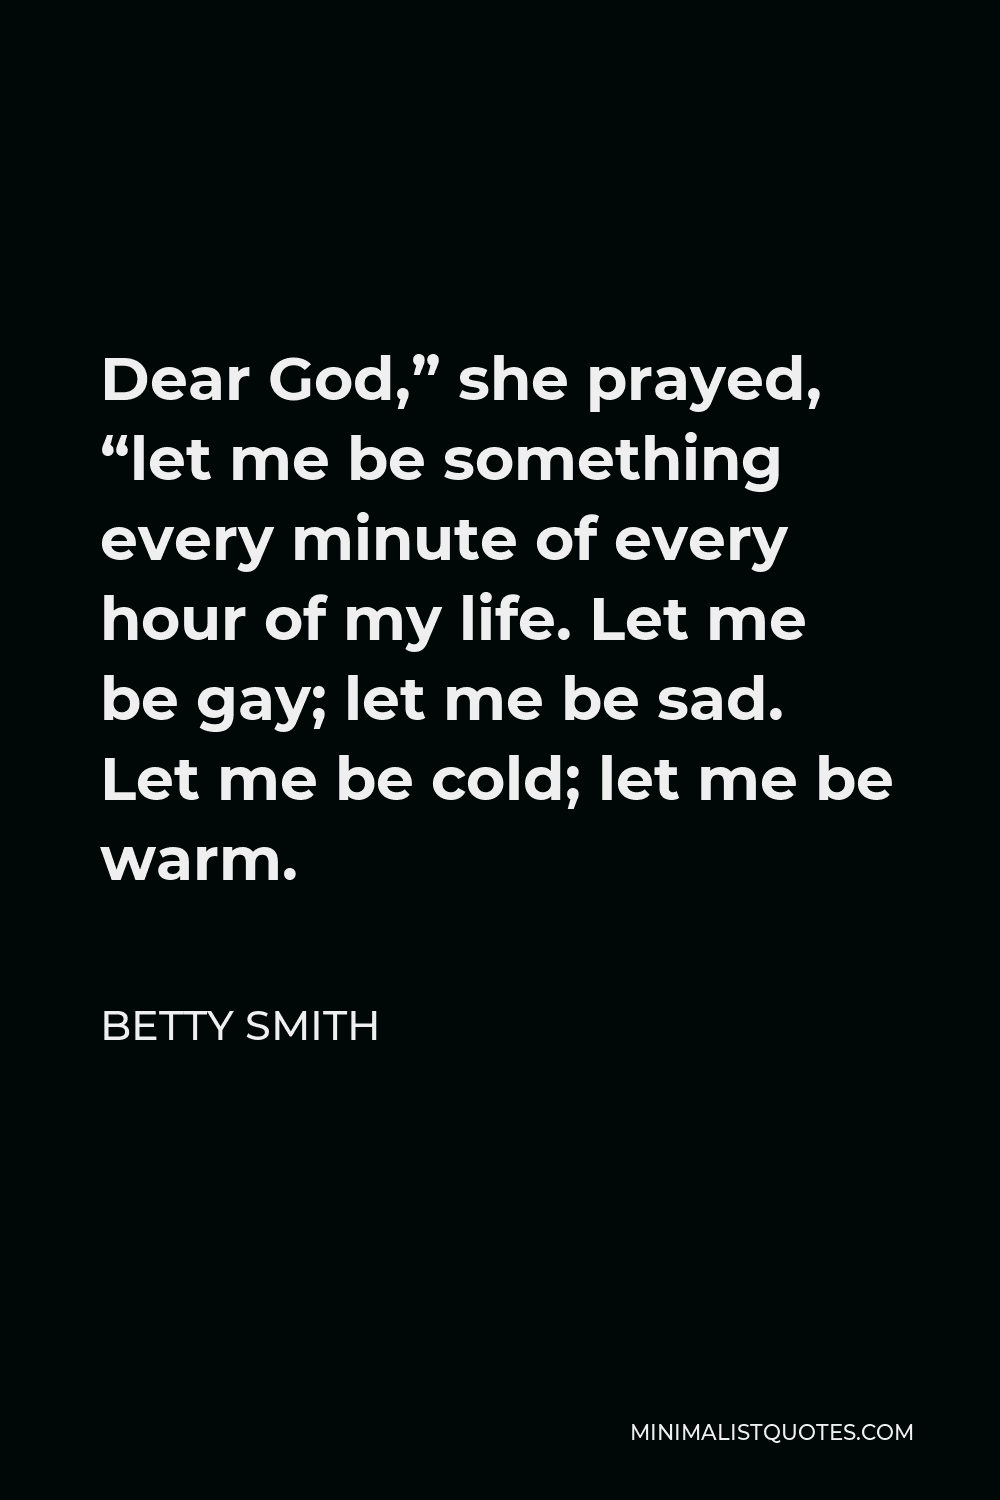 Betty Smith Quote - Dear God,’ she prayed, ‘let me be something every minute of every hour of my life.’